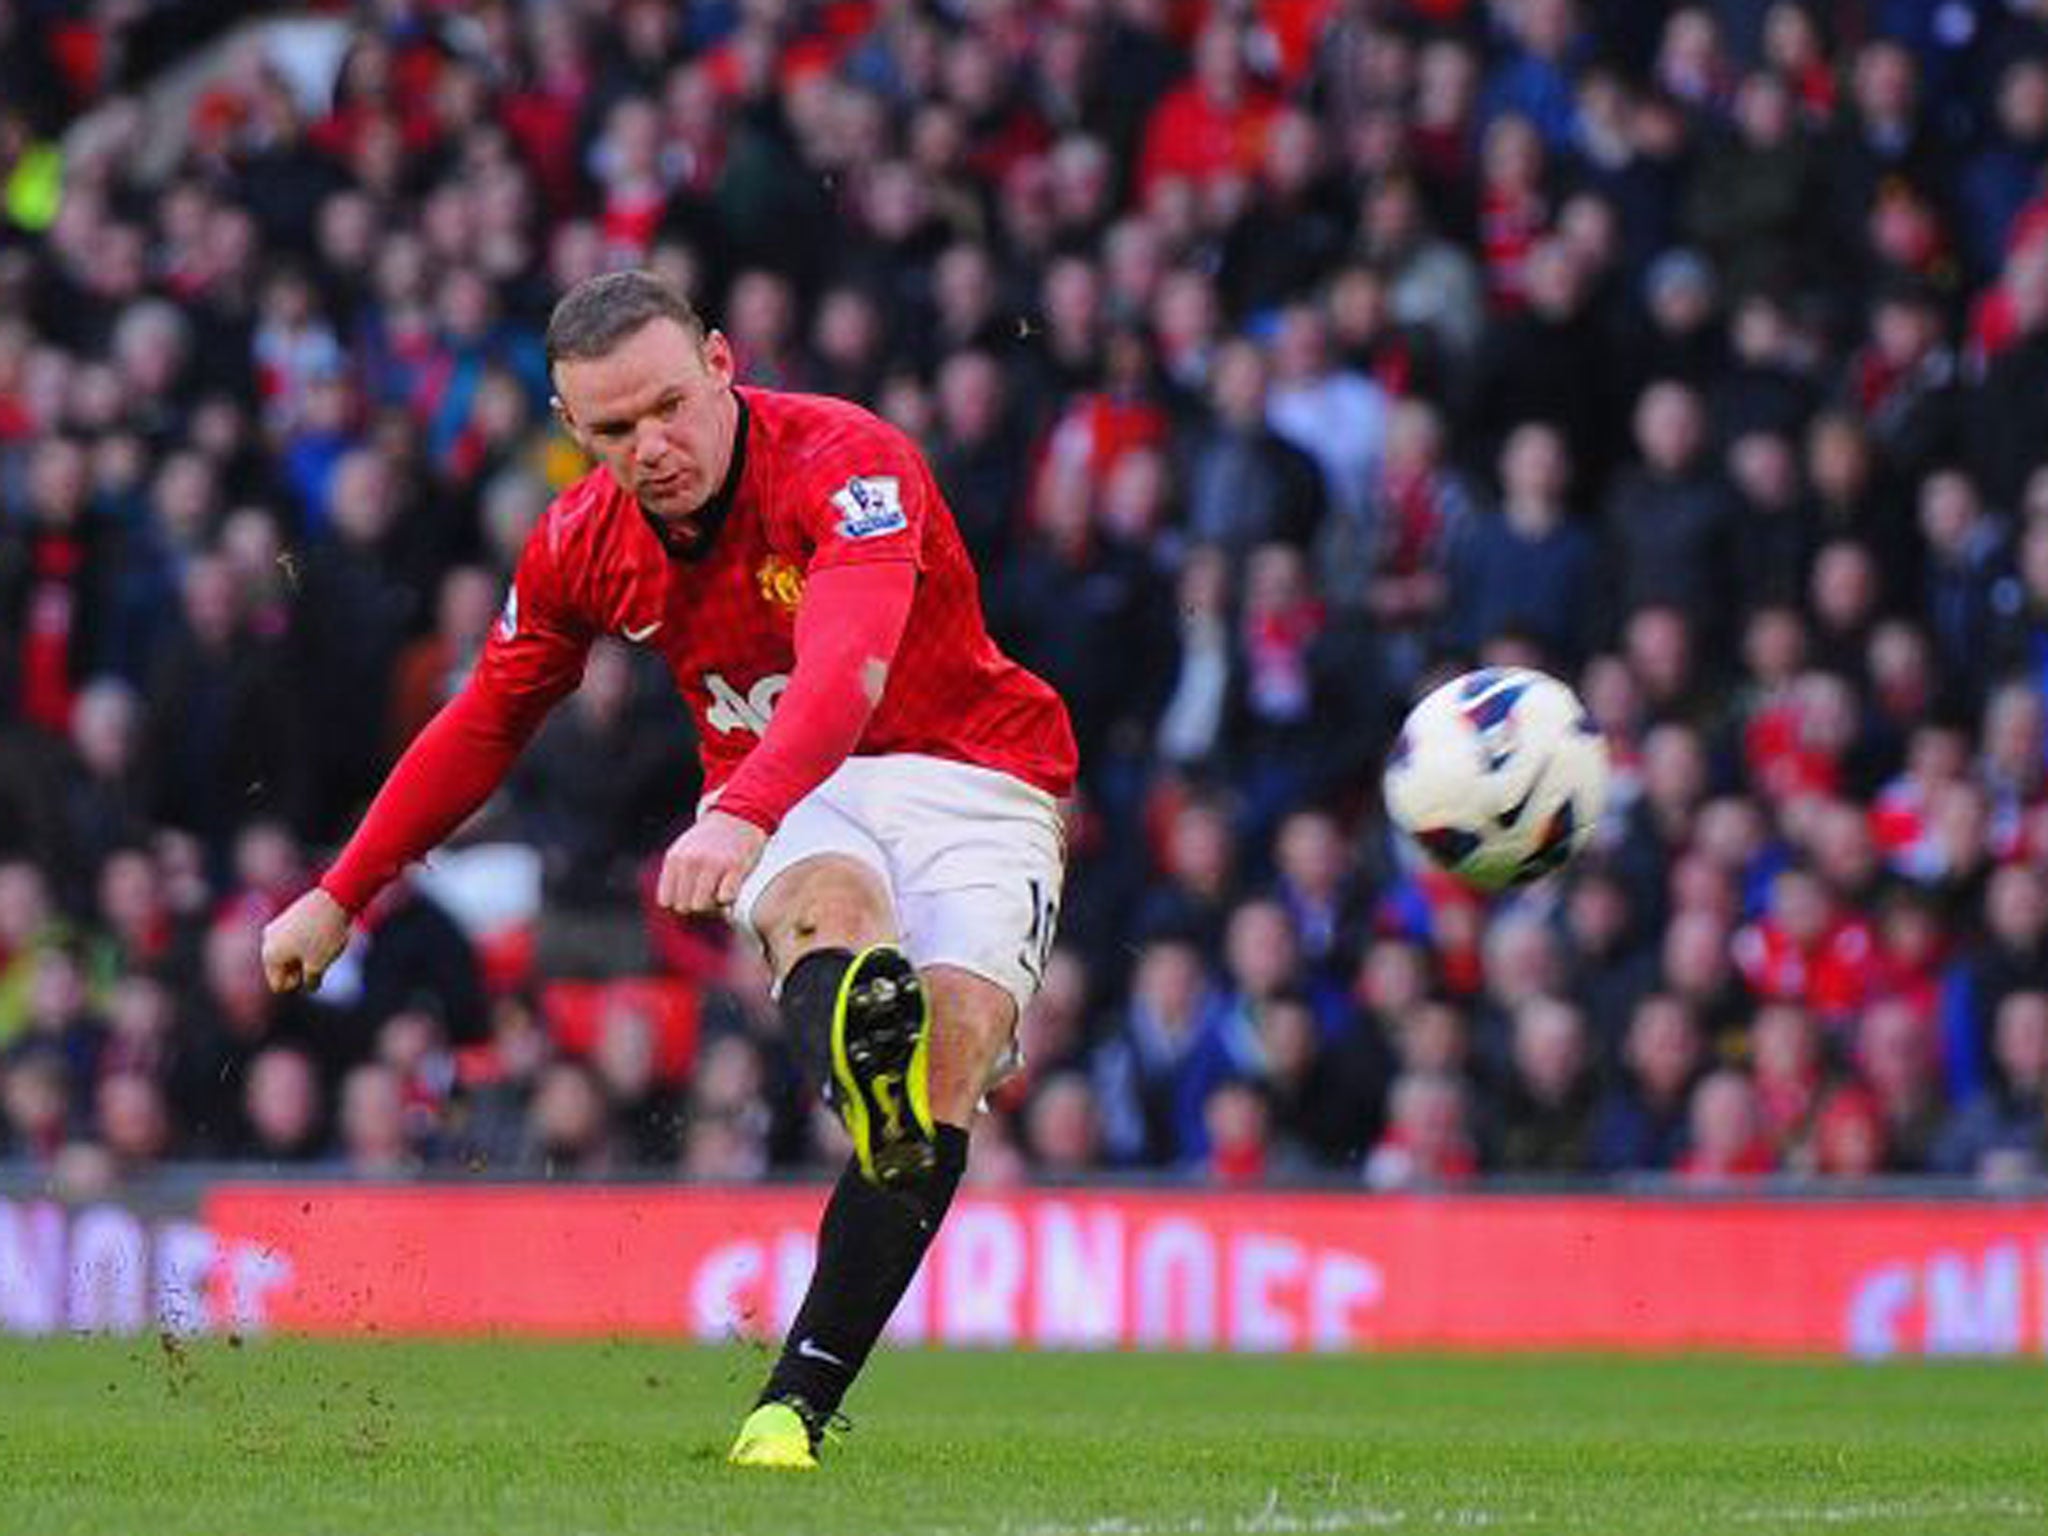 Wayne Rooney shoots to score United’s fourth goal against Norwich